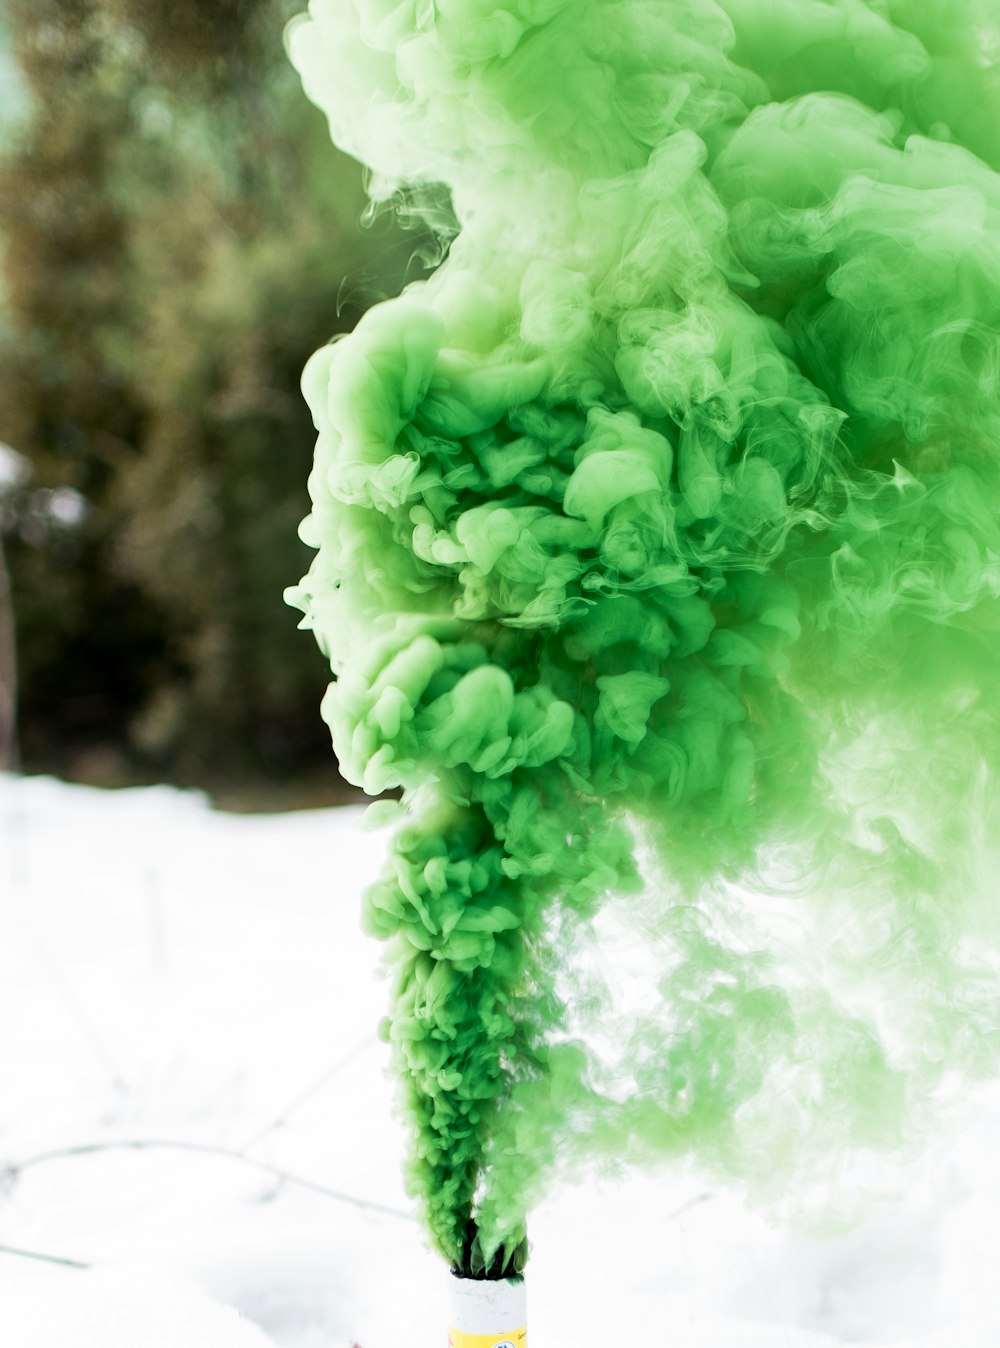 shallow focus photography of canister producing green smoke